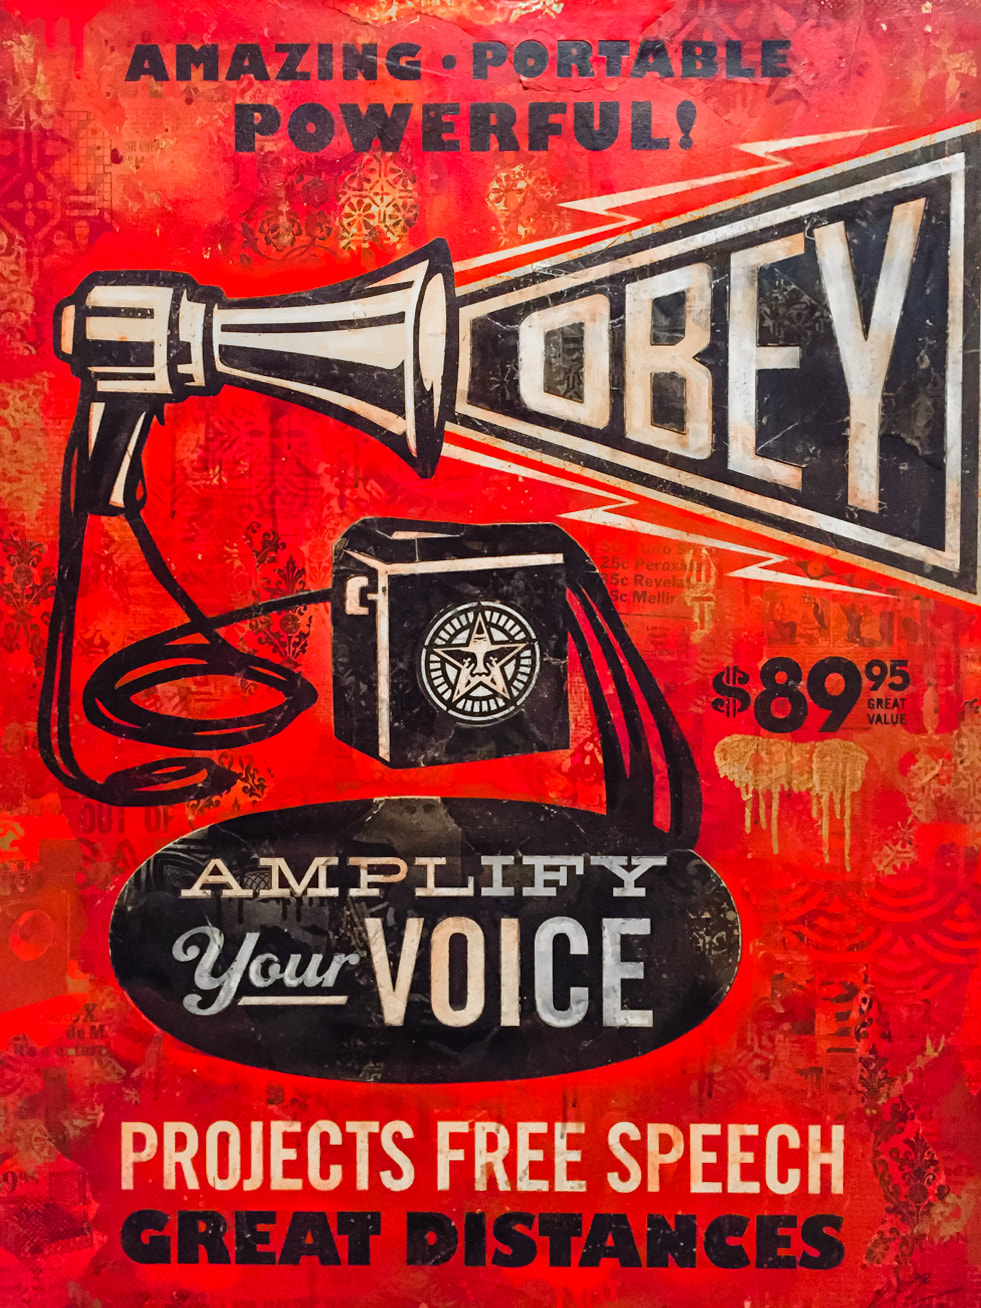 Singapore: Art From The Streets Exhibition at the ArtScience Museum - Megaphone Obey - Shepard Fairey (Obey) - 2012.